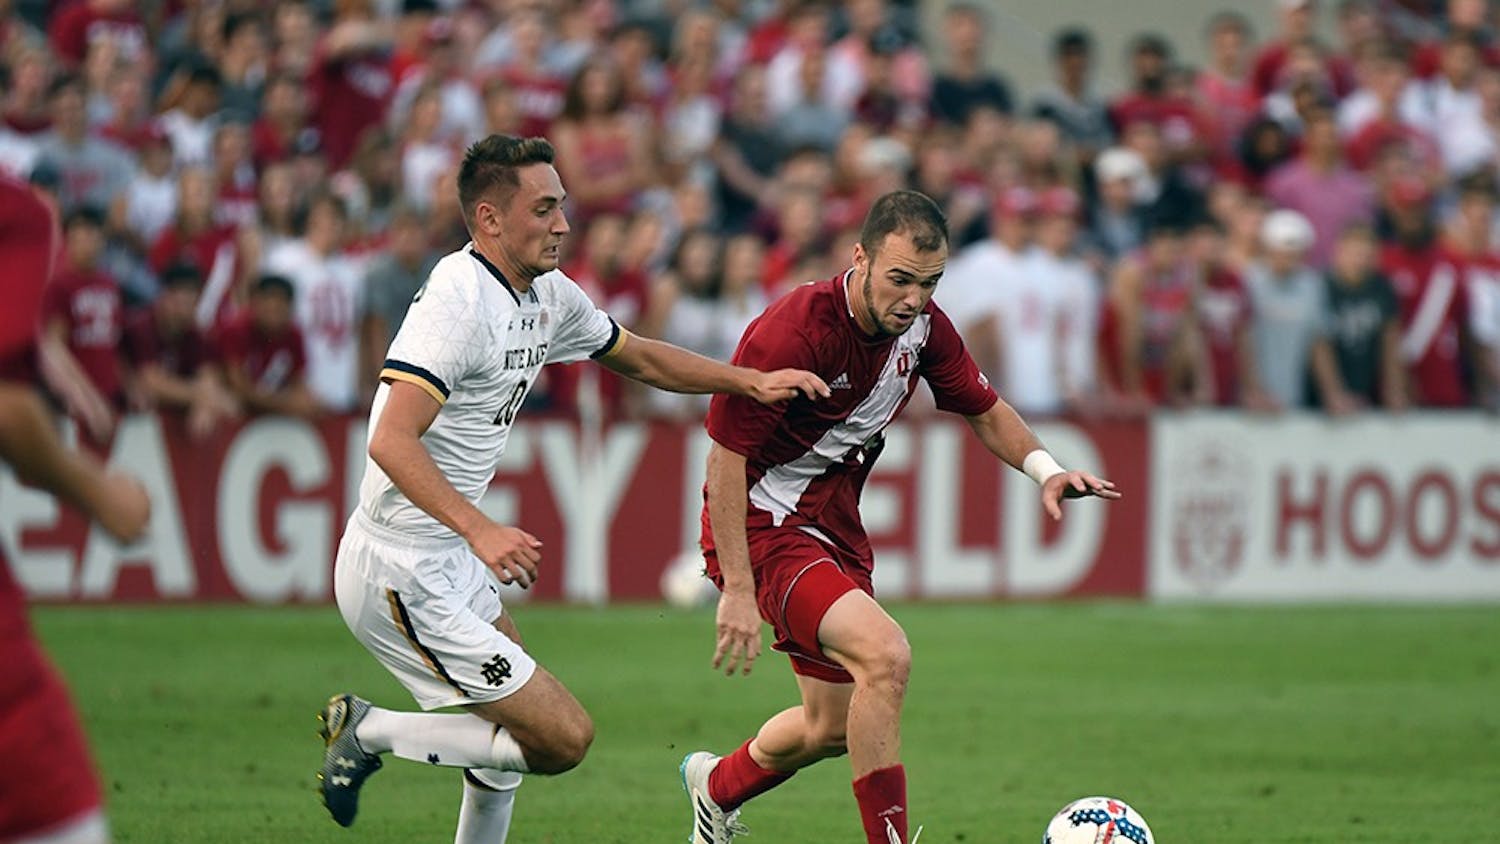 Then-junior, now senior defender Andrew Gutman dribbles the ball against Notre Dame on Sept. 26, 2017 at Bill Armstrong Stadium. No. 4 IU will travel to South Bend Tuesday night to take on No. 12 Notre Dame.&nbsp;